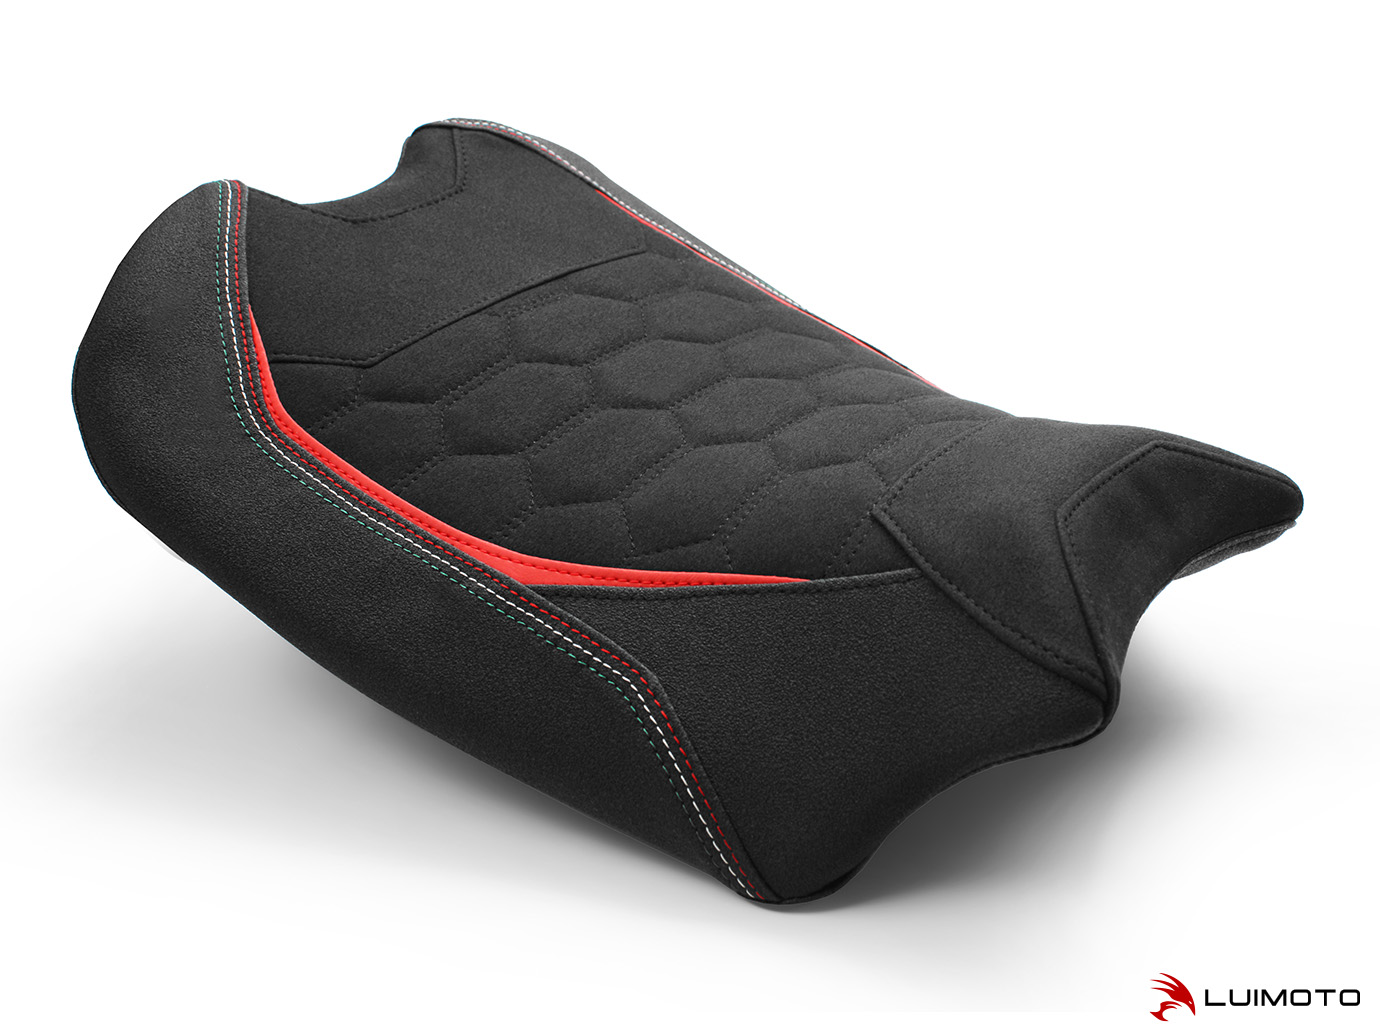 ALL Motorcycle Lv seat cover (HOt ITEM )